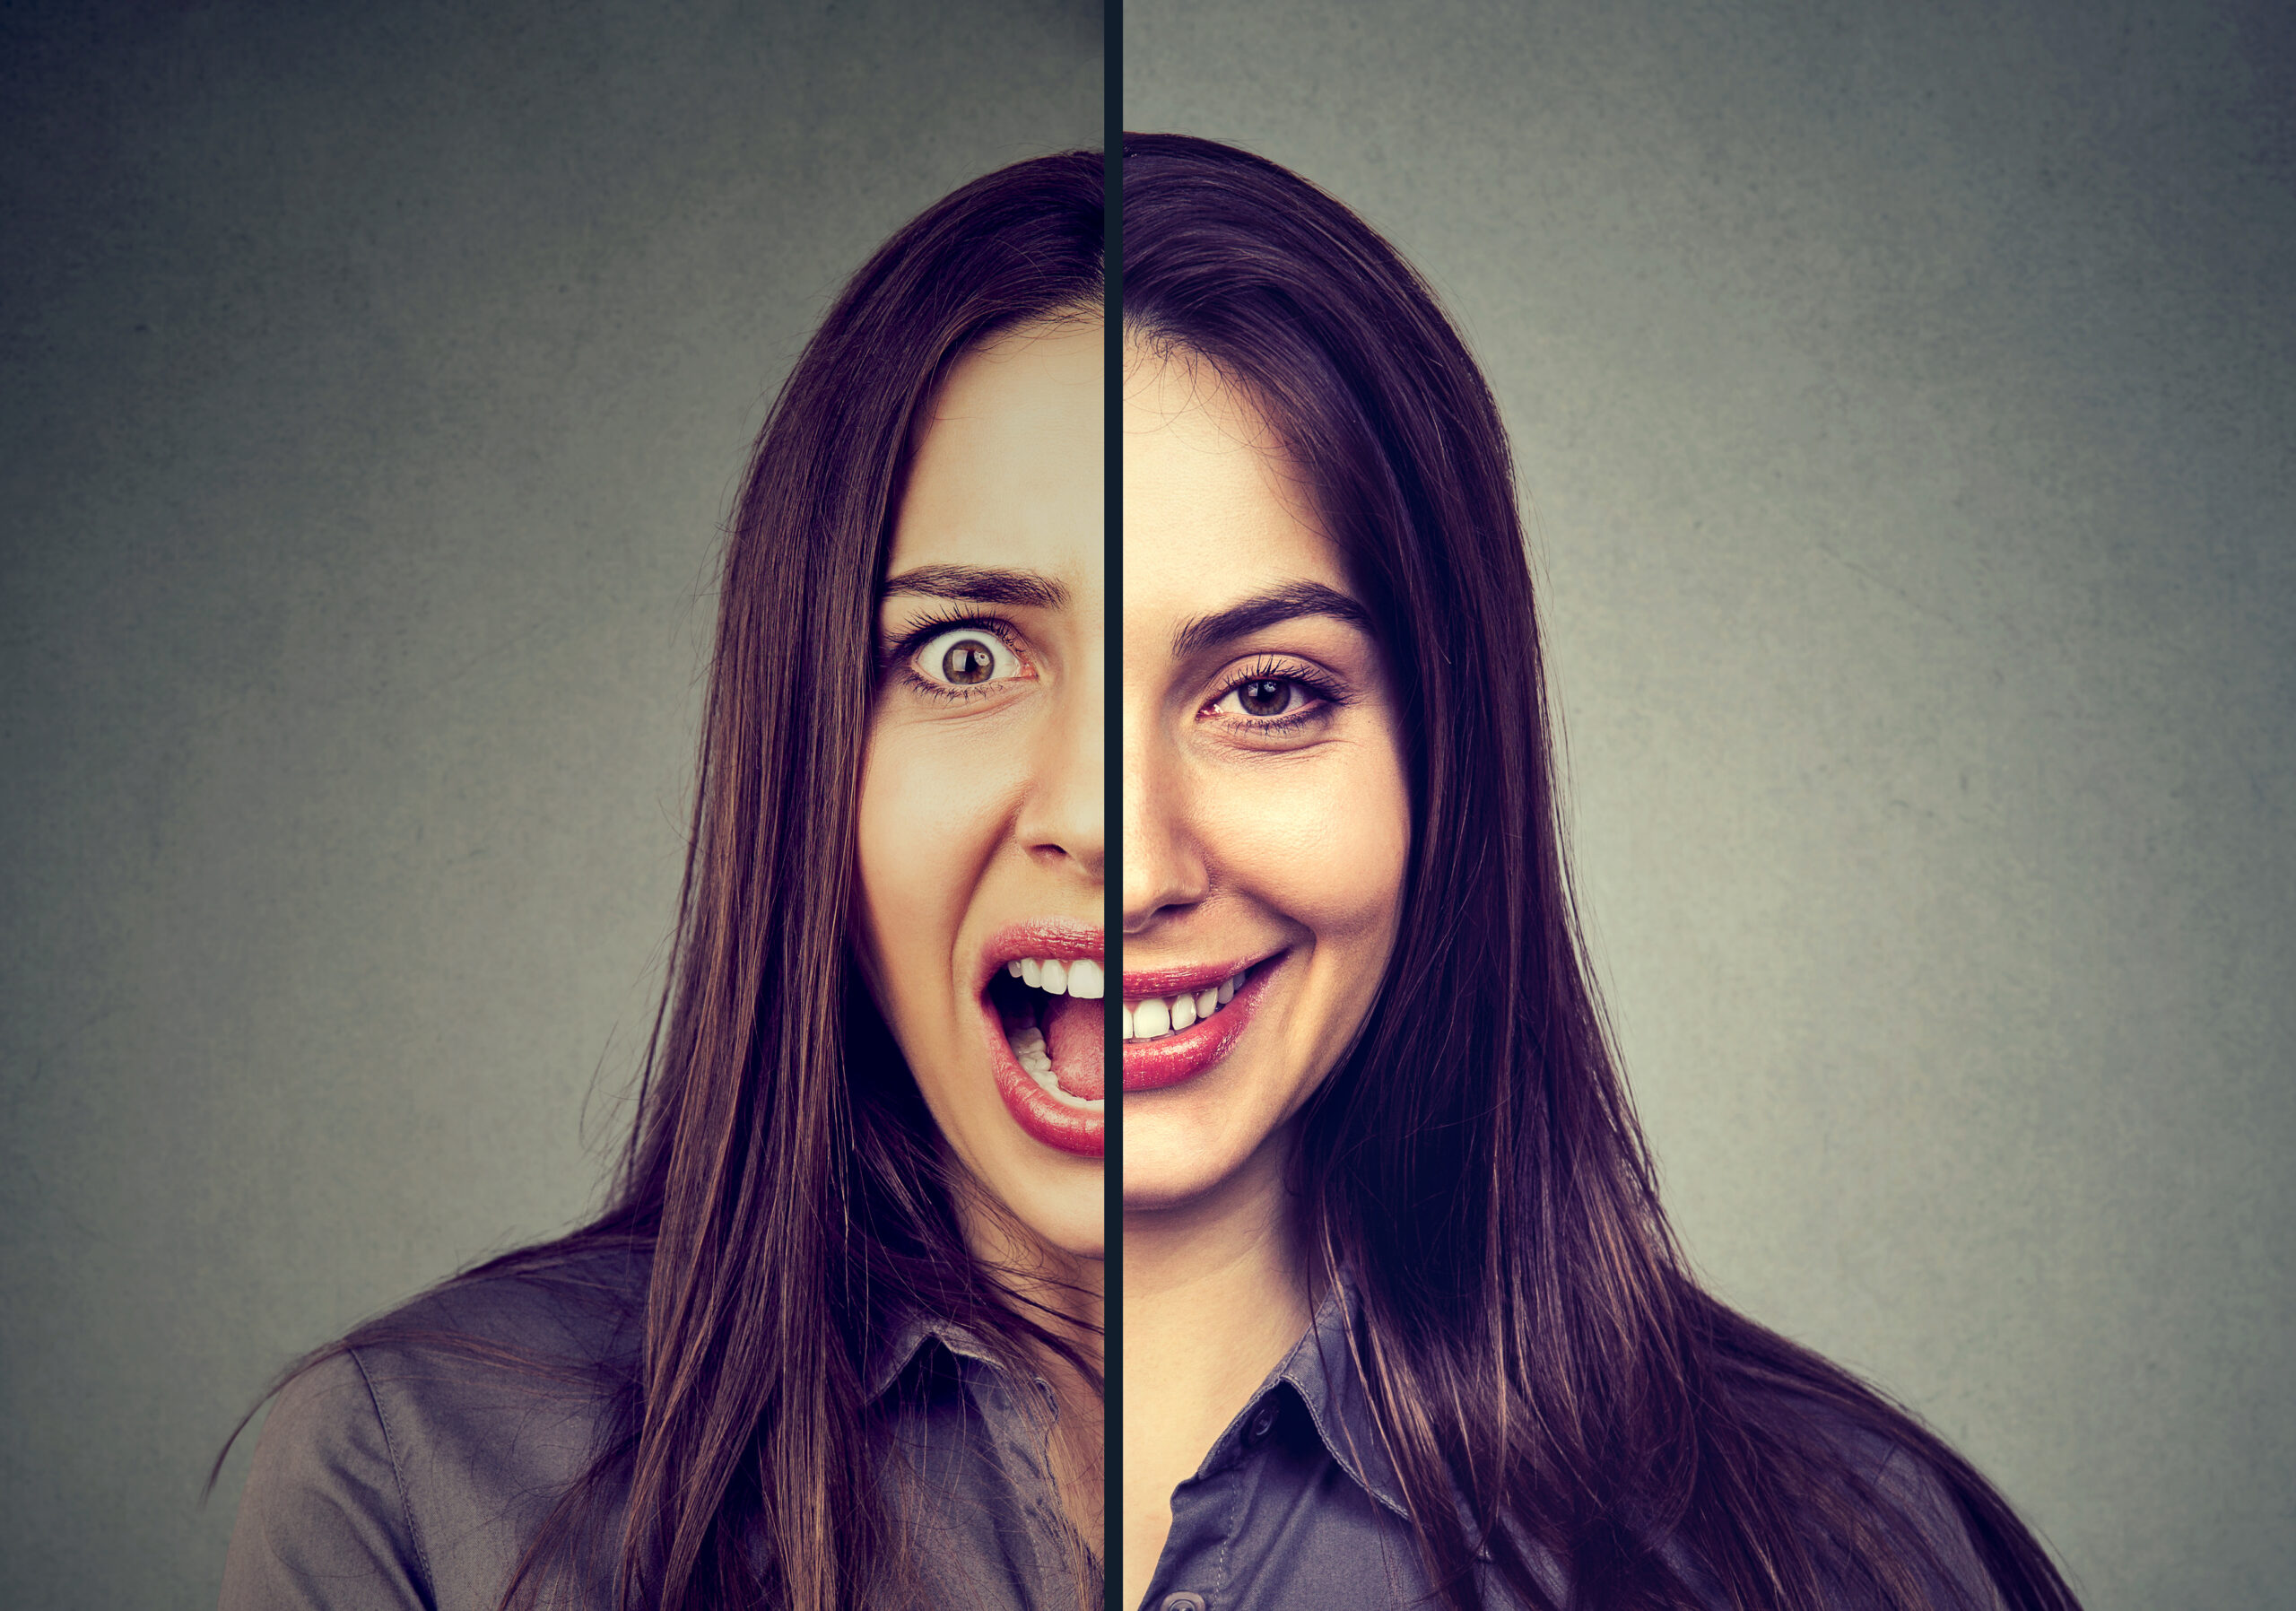 Bipolar disorder and split personality concept. Woman with double face expression isolated on gray background